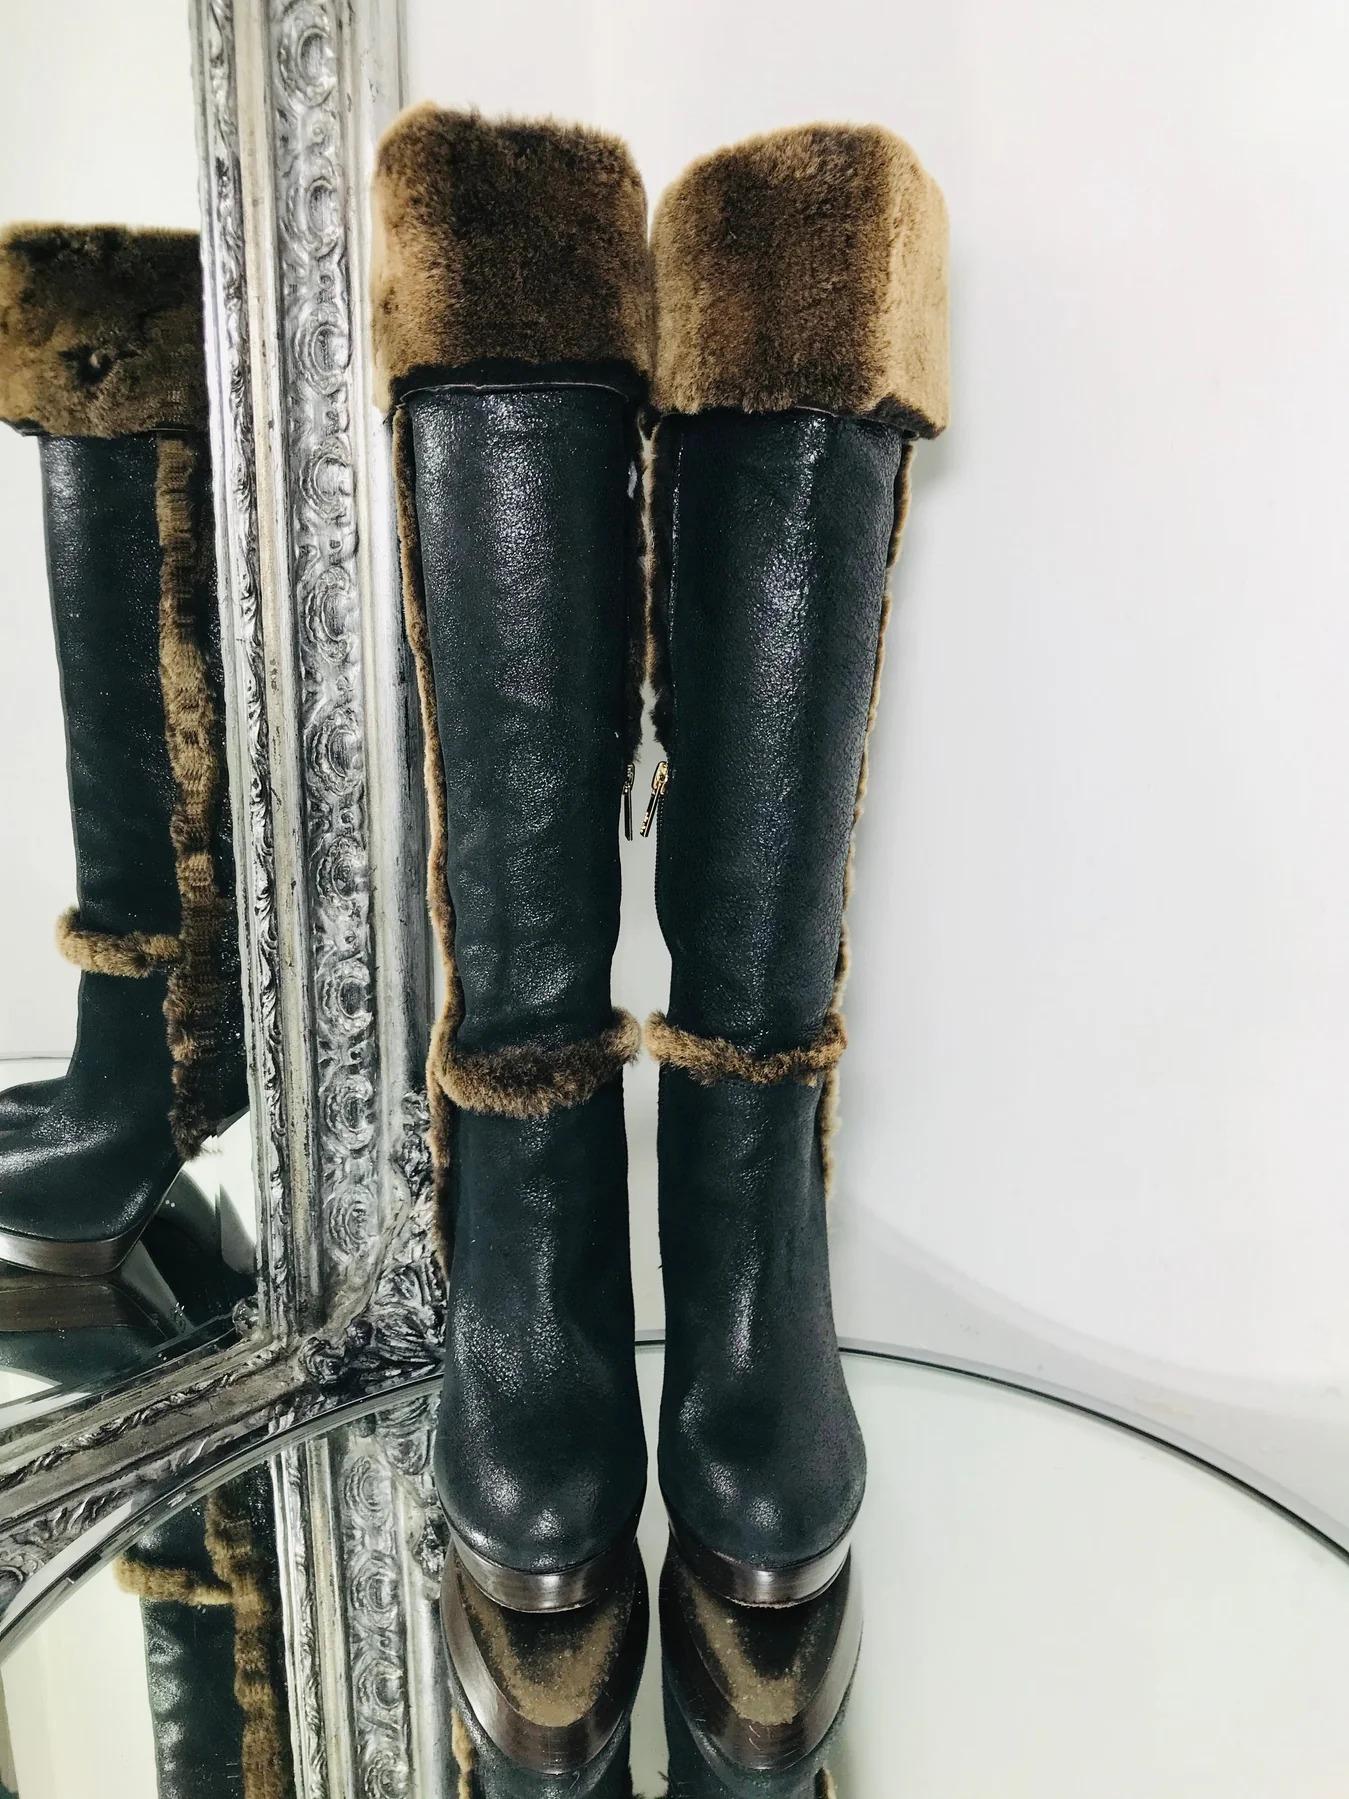 Tory Burch Leather & Shearling Boots

Sebastian knee high boots crafted from leather with shearling trim in brown. Exposed zip at inner side and embossed logo patch at heel cap.

Additional information:
Size – 8M - 6UK
Composition - Leather,